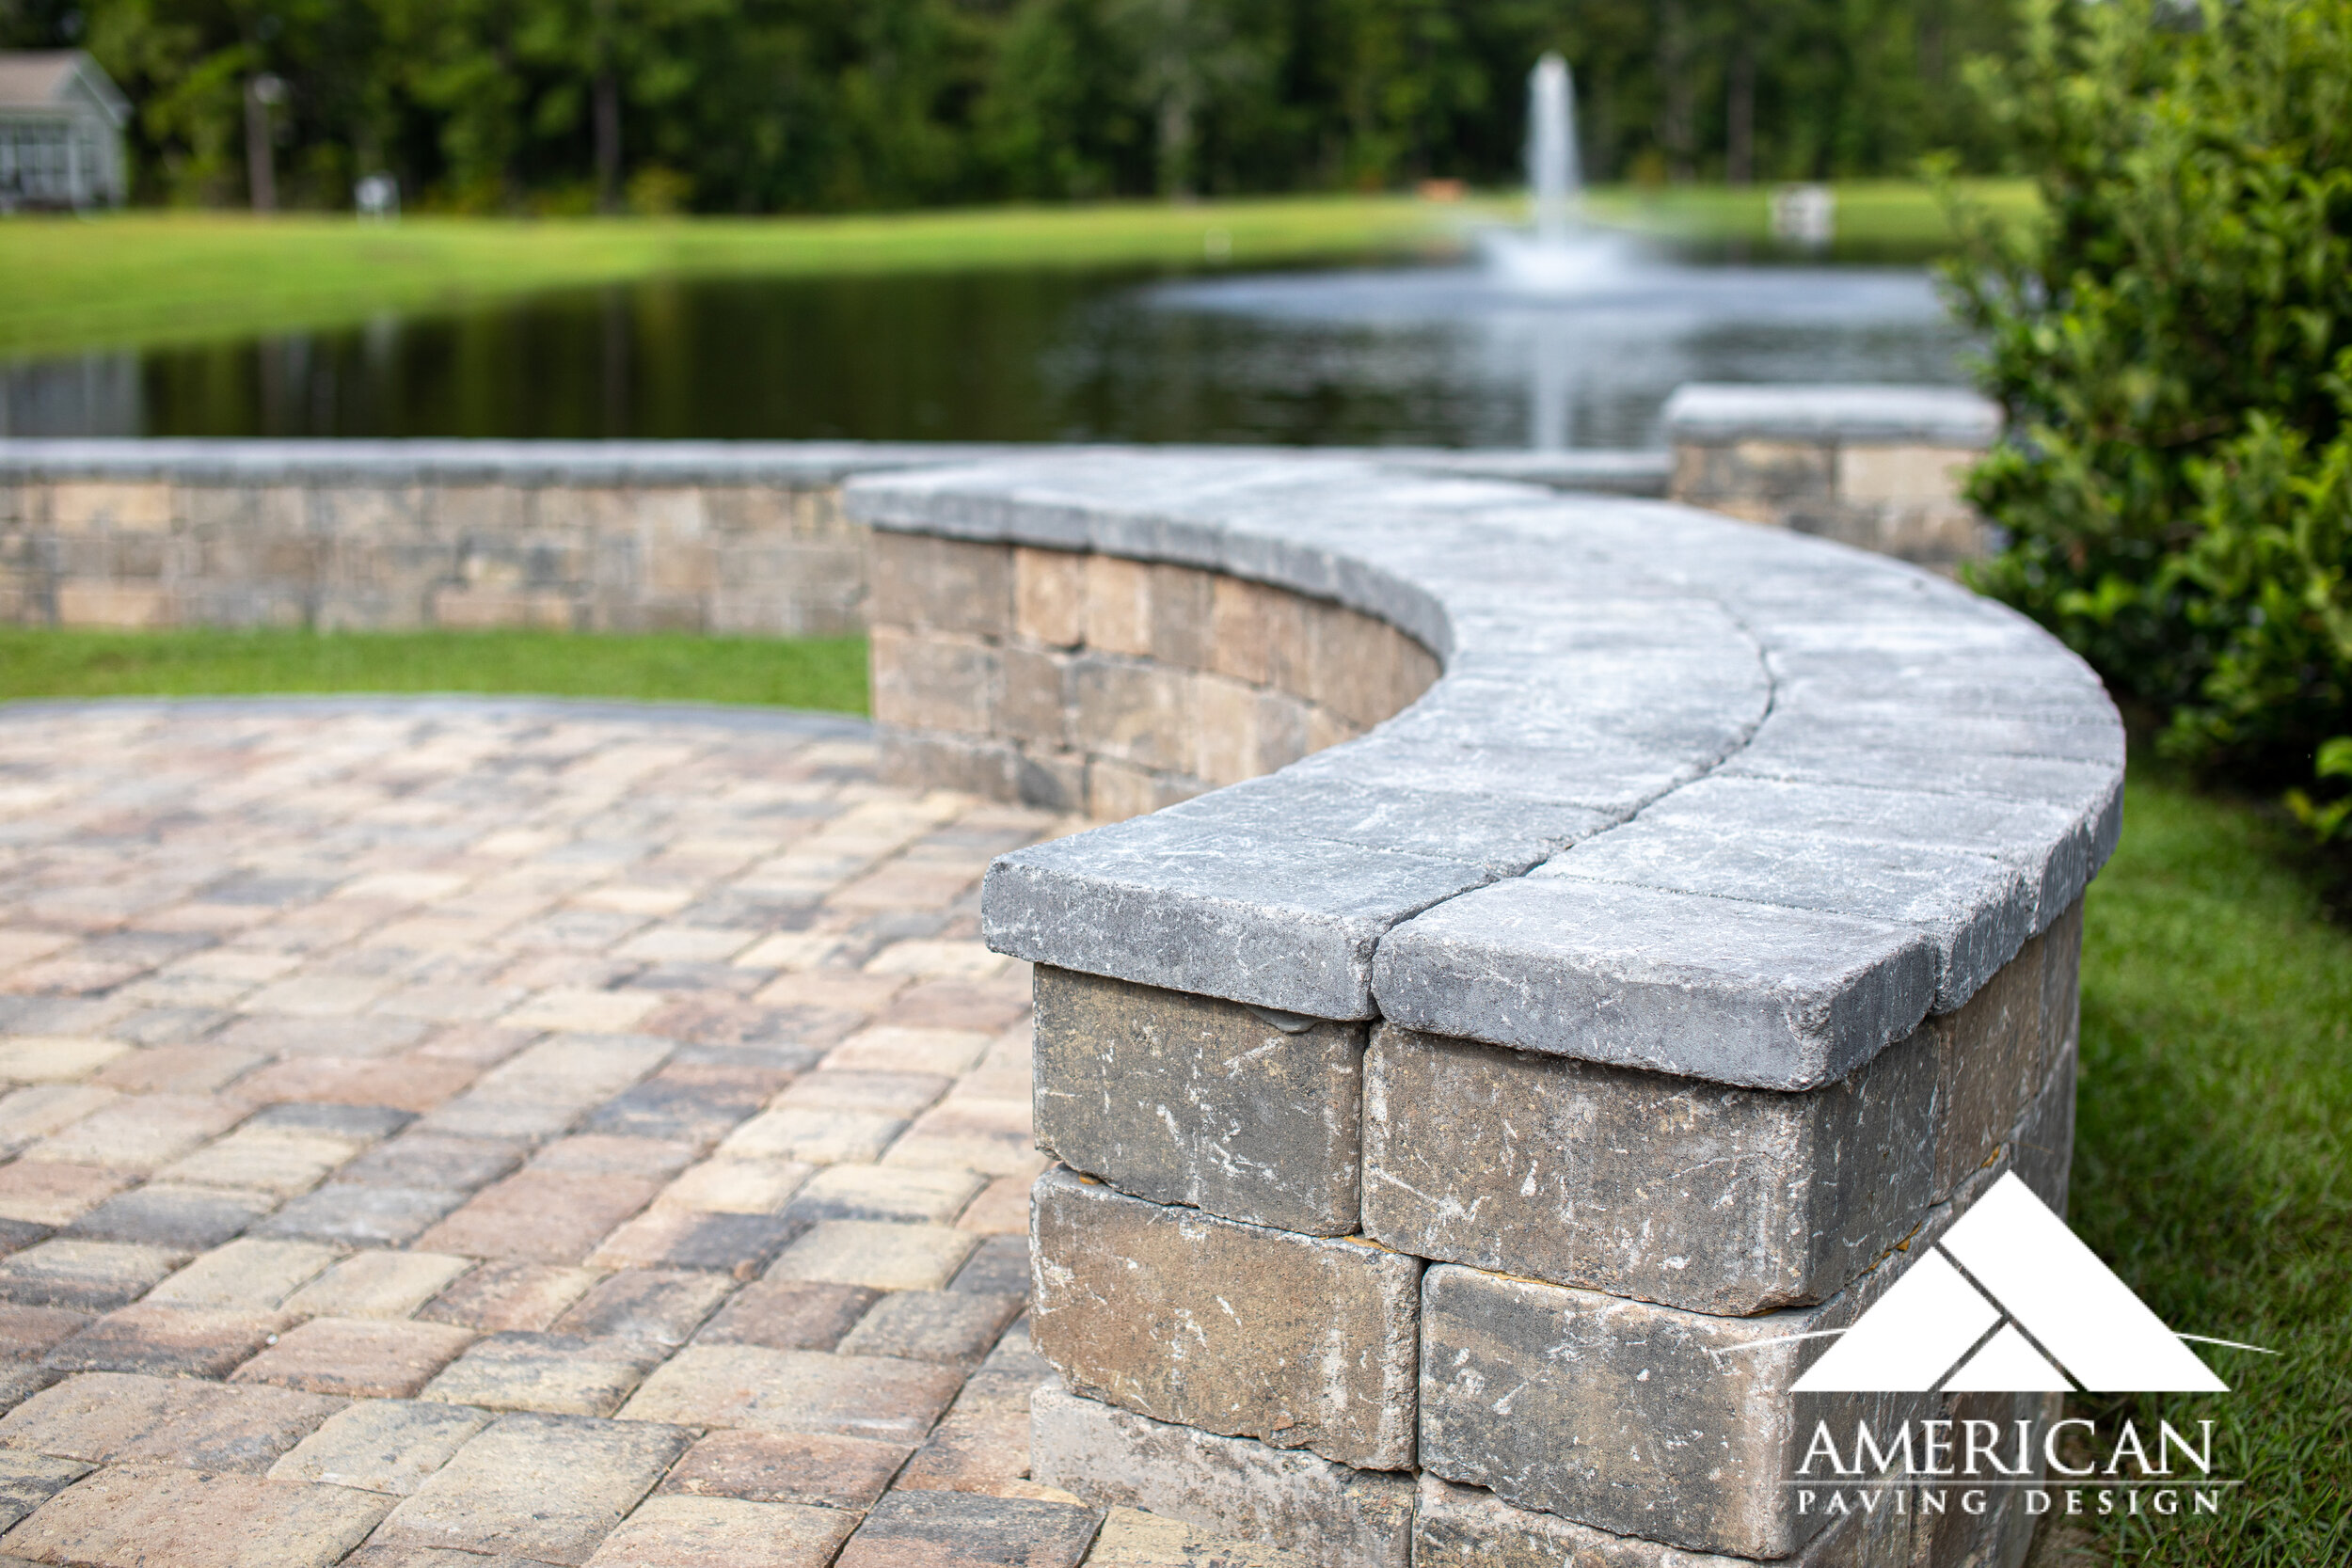 Seating Wall Designs - What type works best for your home? — American  Paving Design